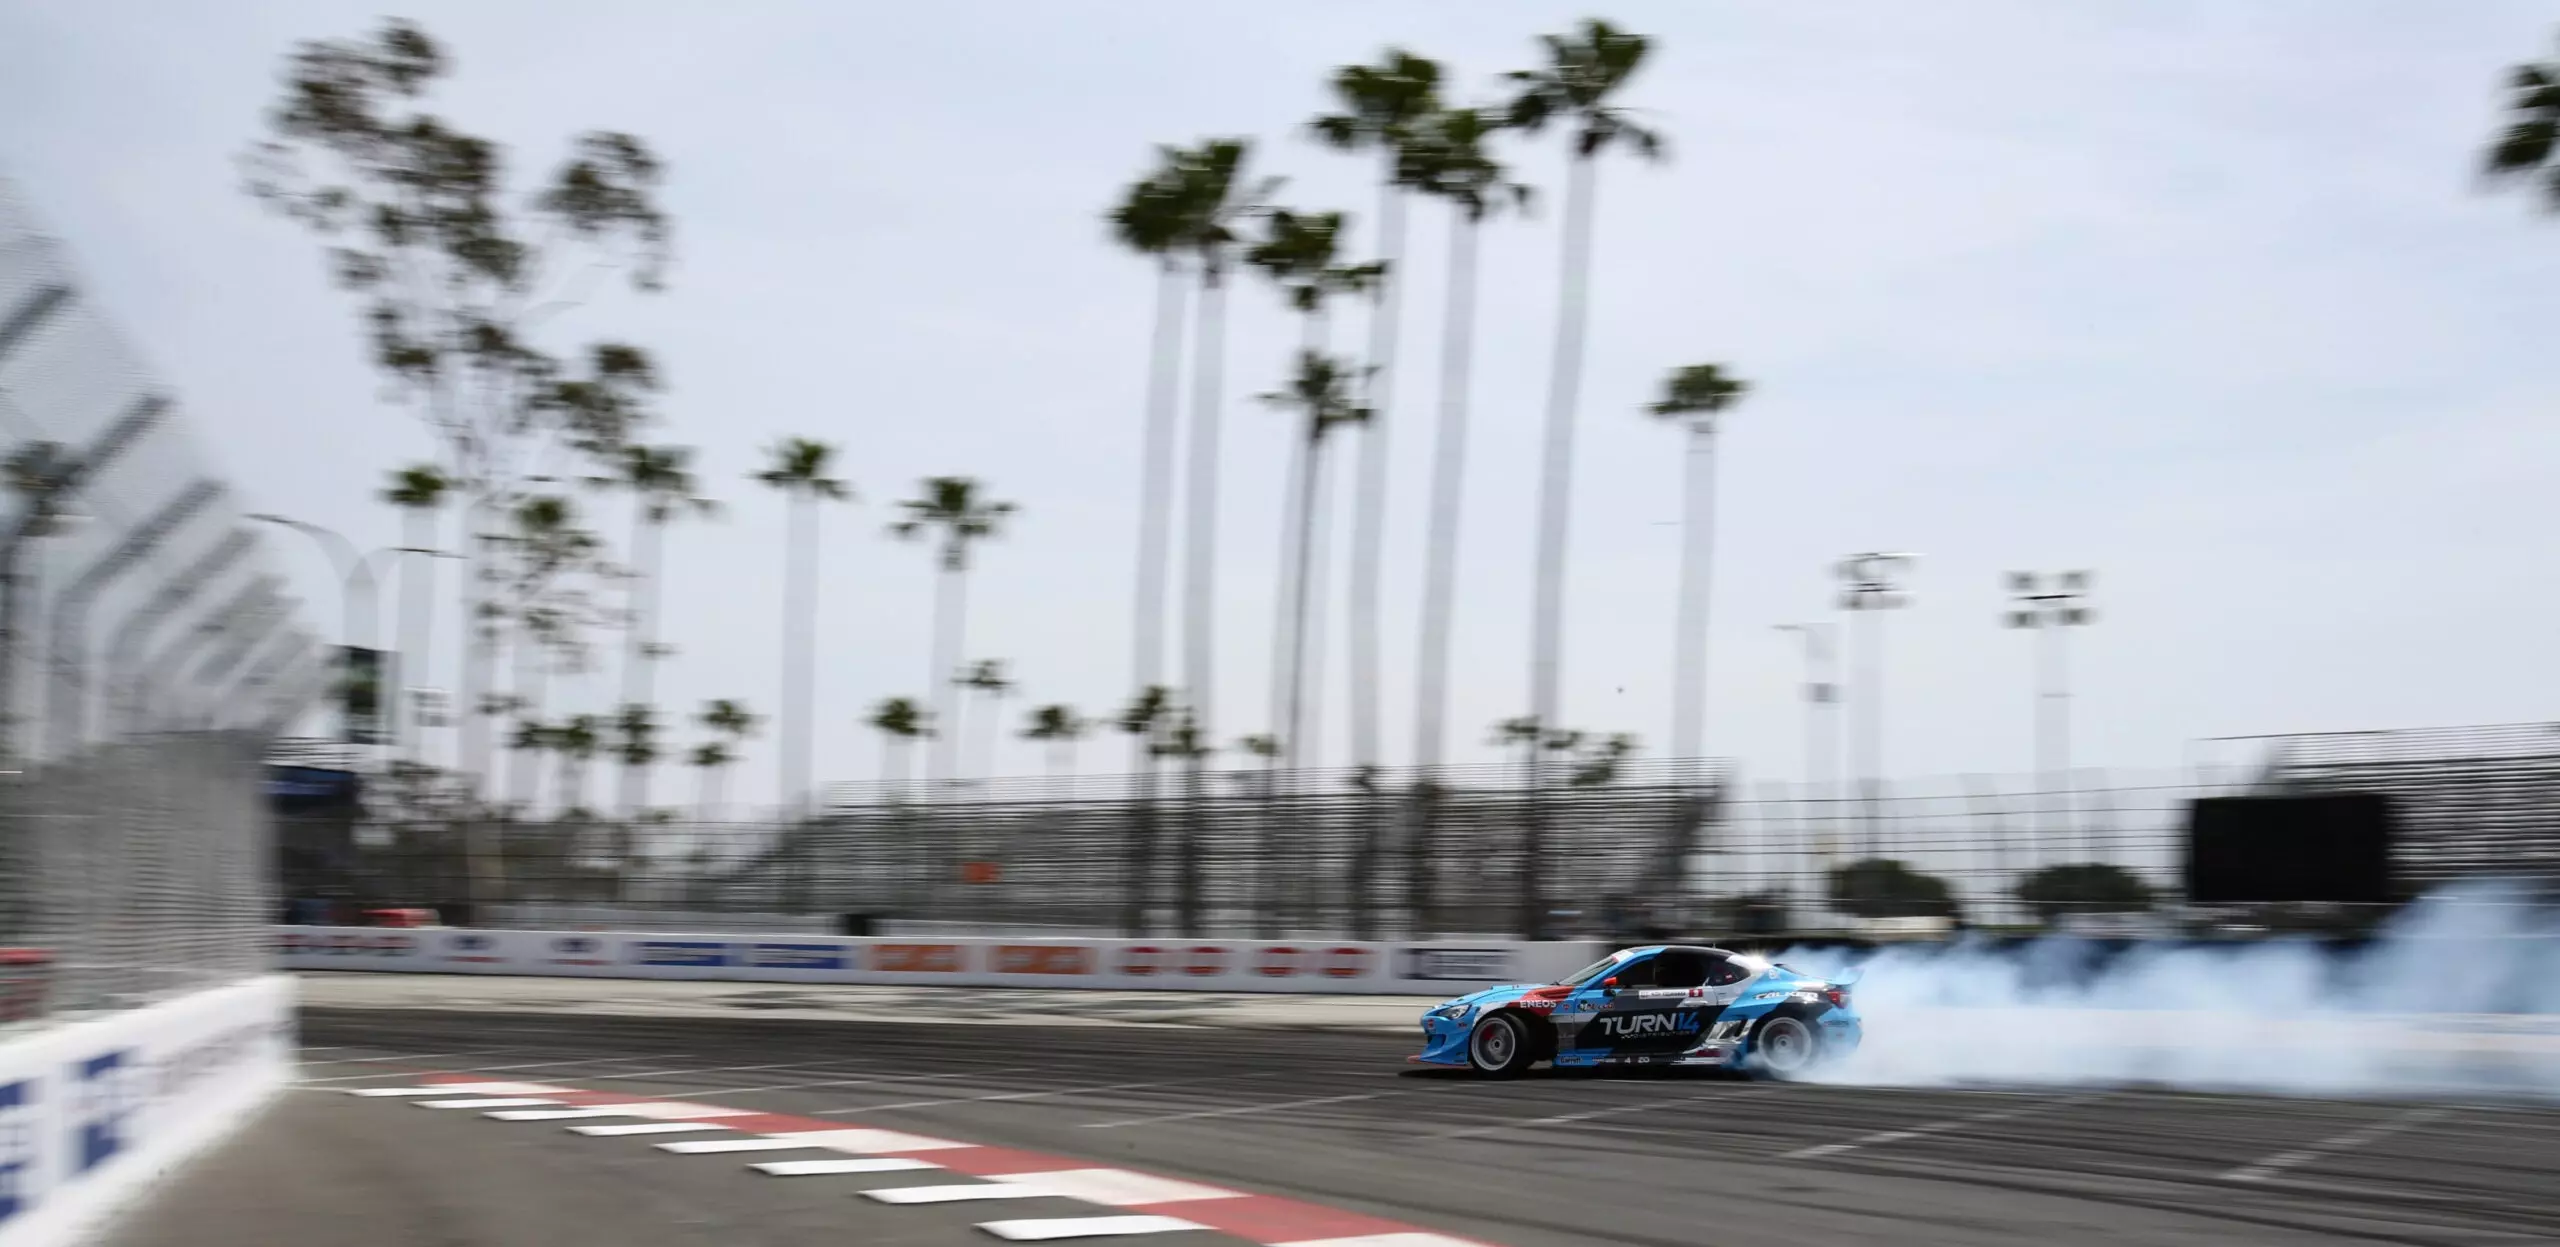 Palm Trees, Sunshine, and Tire Smoke From a 8.1-Liter Turbo LS-Powered BRZ | Autance